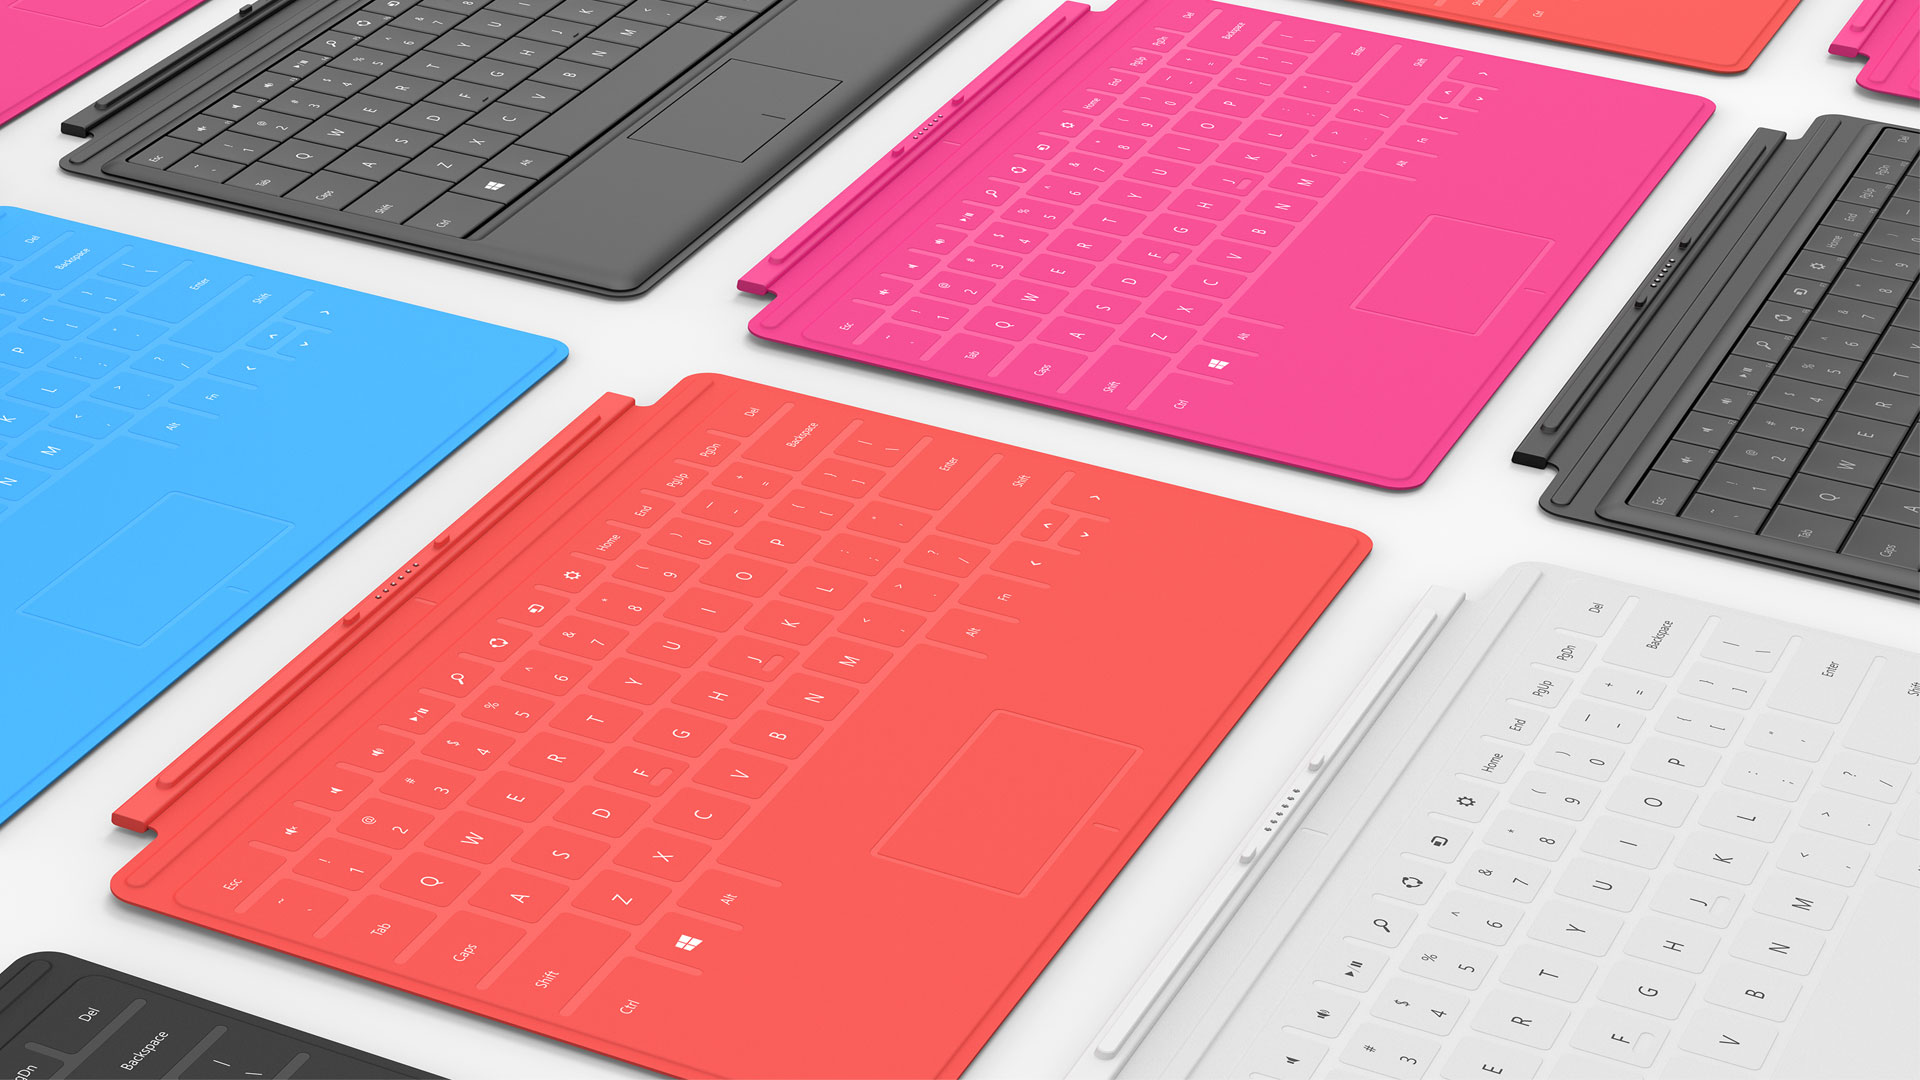 Mouthwatering Keyboards With Surface Microsoft World